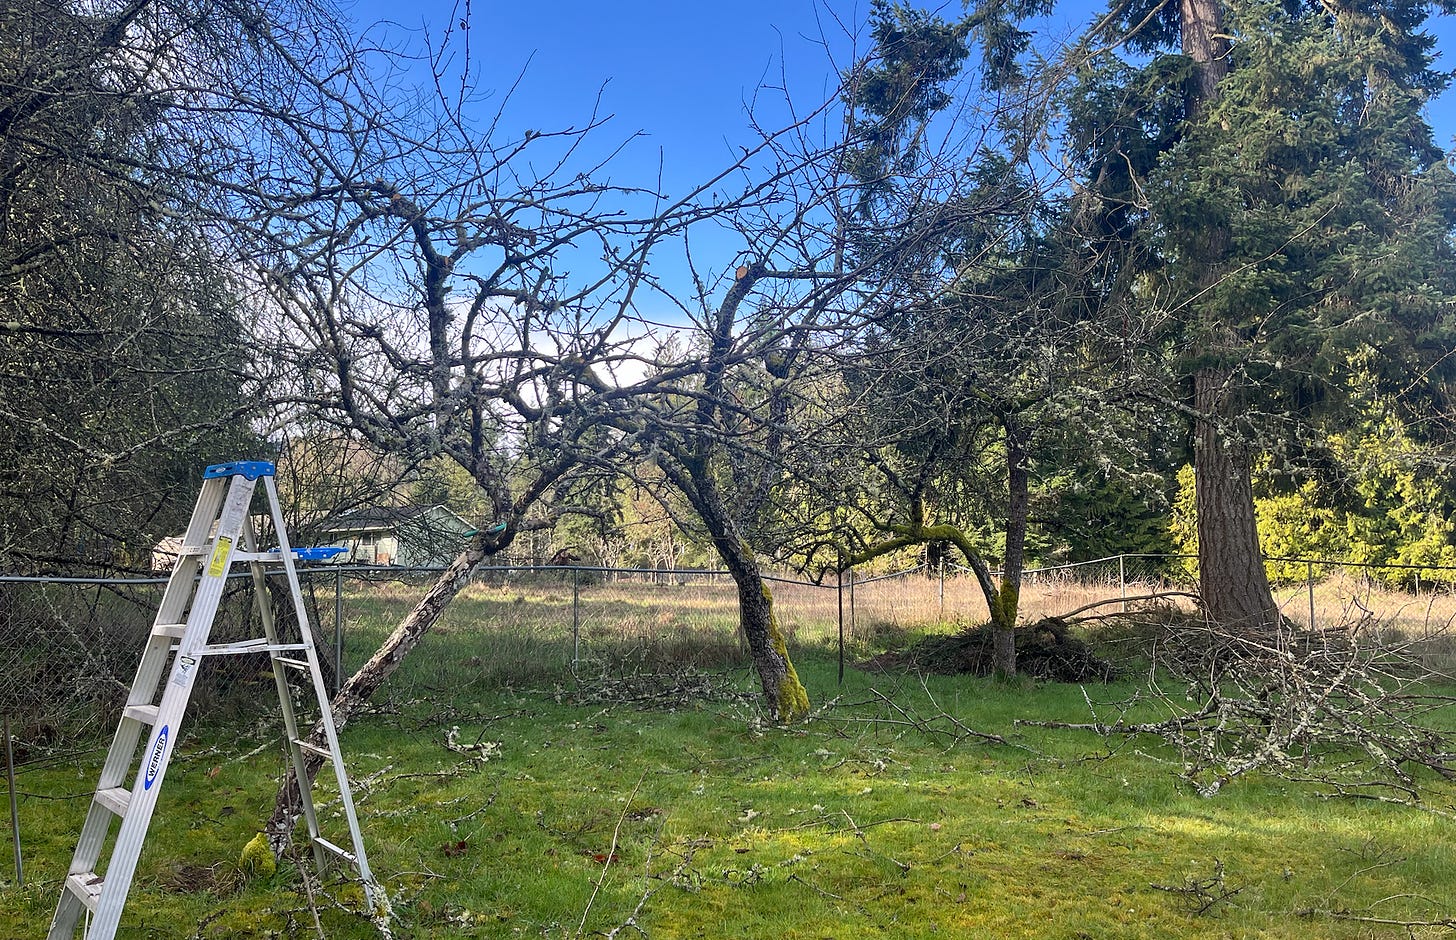 Apple trees with piles of pruned branches on the ground. A latter.